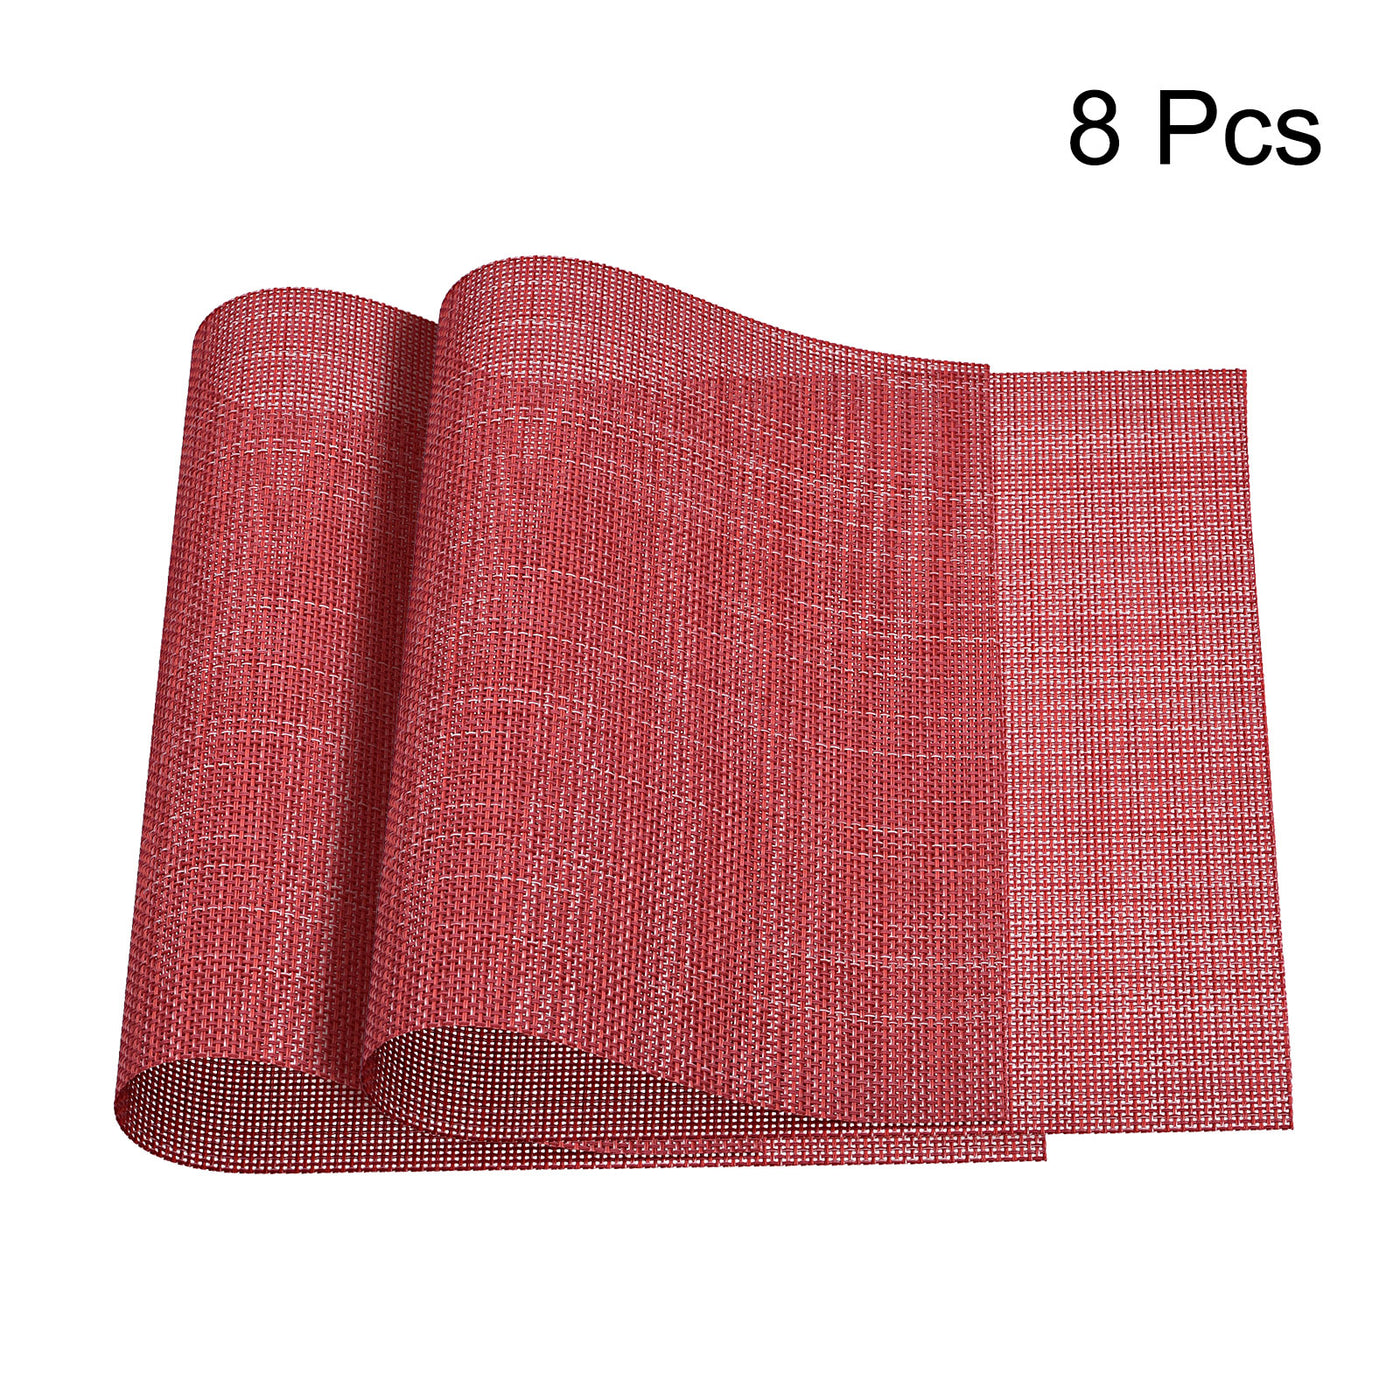 uxcell Uxcell Place Mats, 450x300mm Table Mats Set of 8 PVC Washable Woven Placemat Red